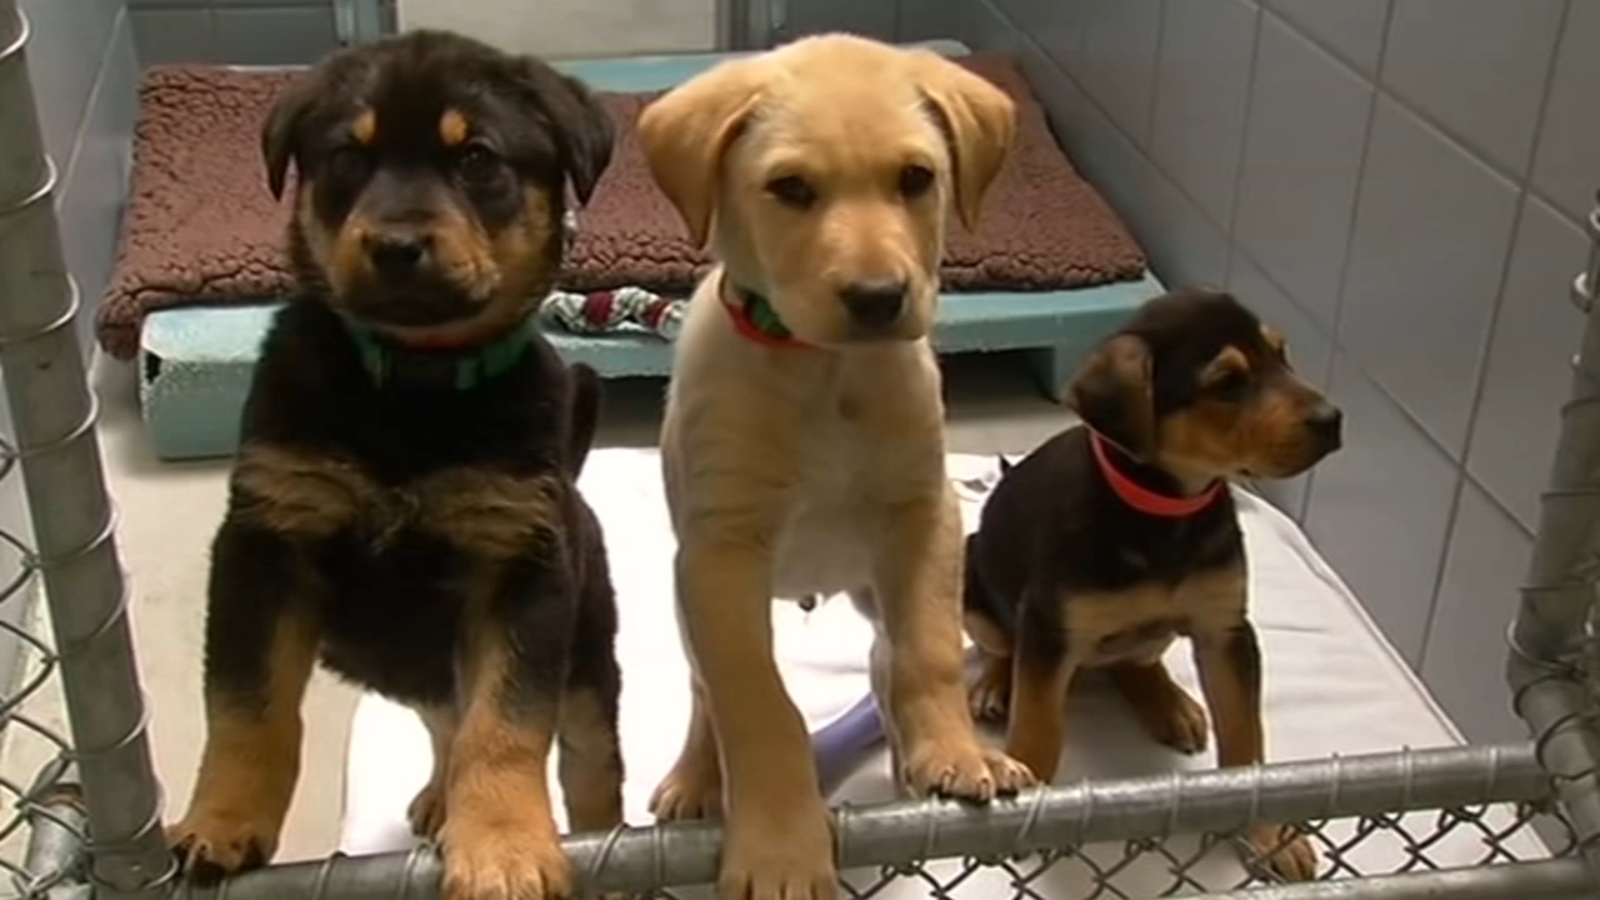 Google Sues Alleged Scammer Behind Puppies Fraud Scheme - Don't Fall For These Scams! 27